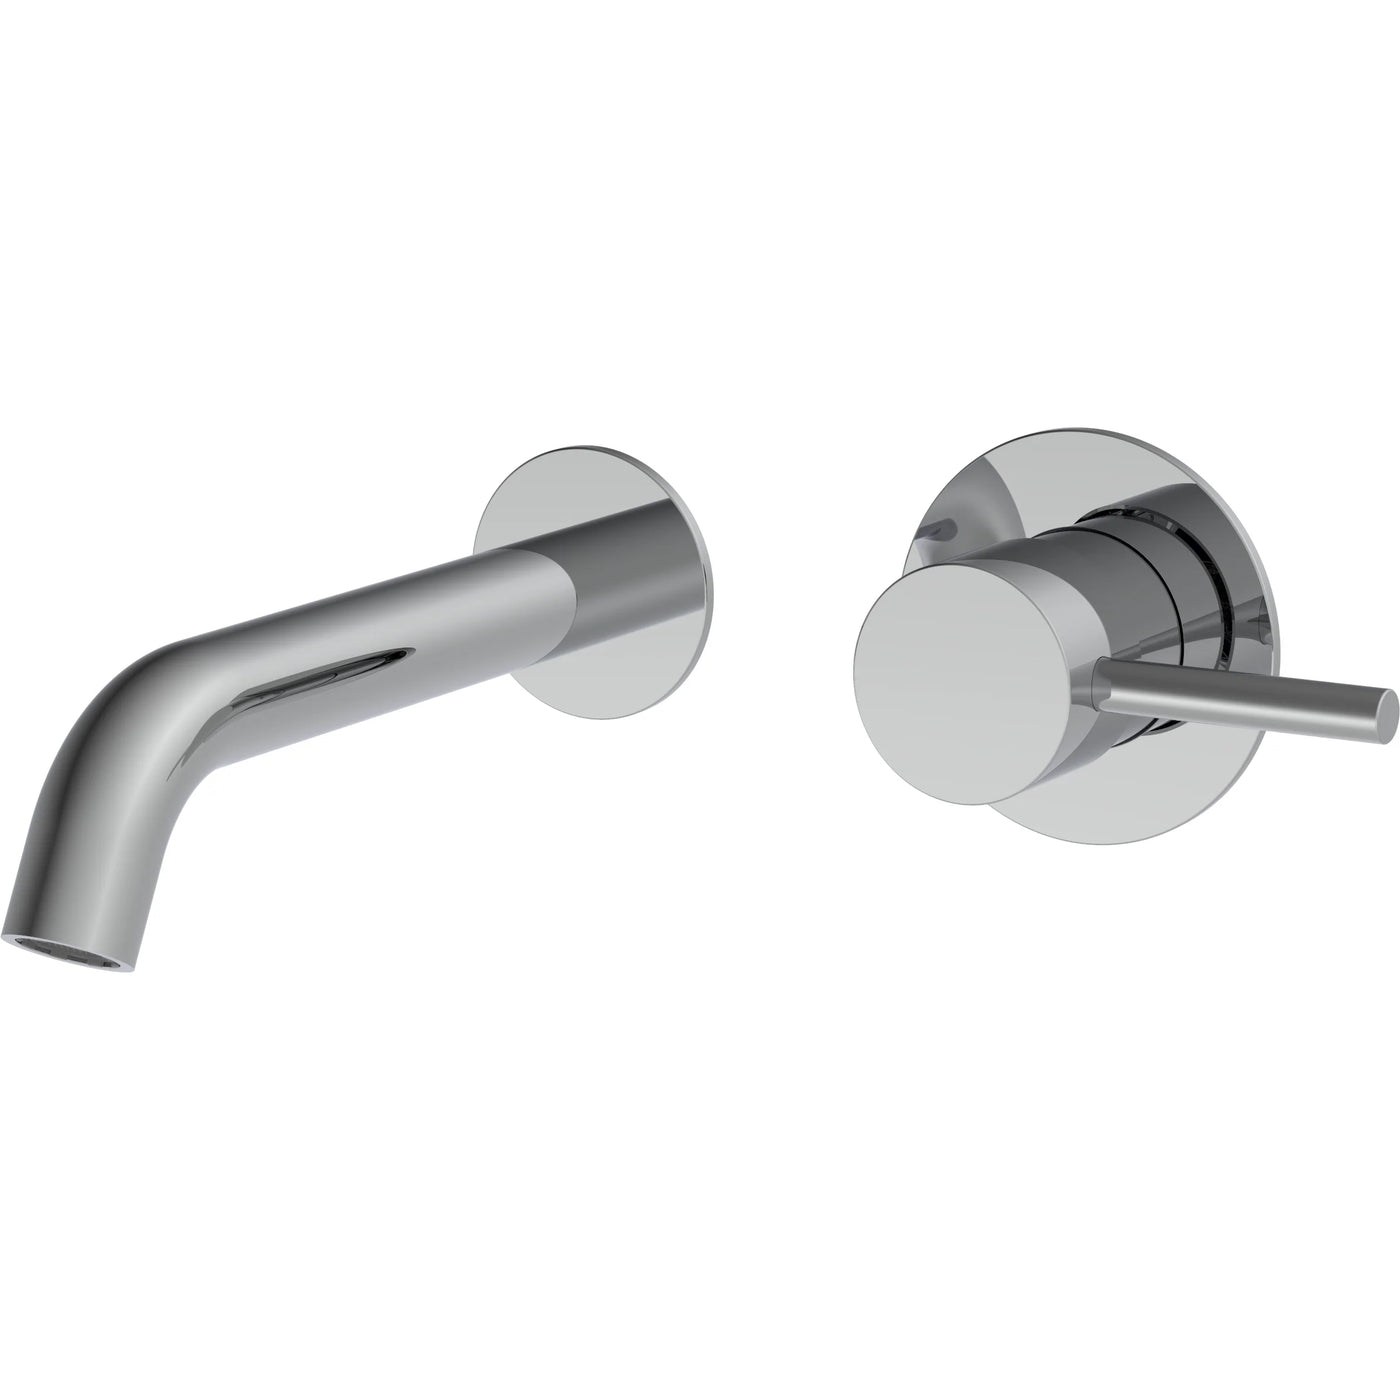 Saneux Wall Mounted Chrome COS Plates - Letta London - Basin Taps